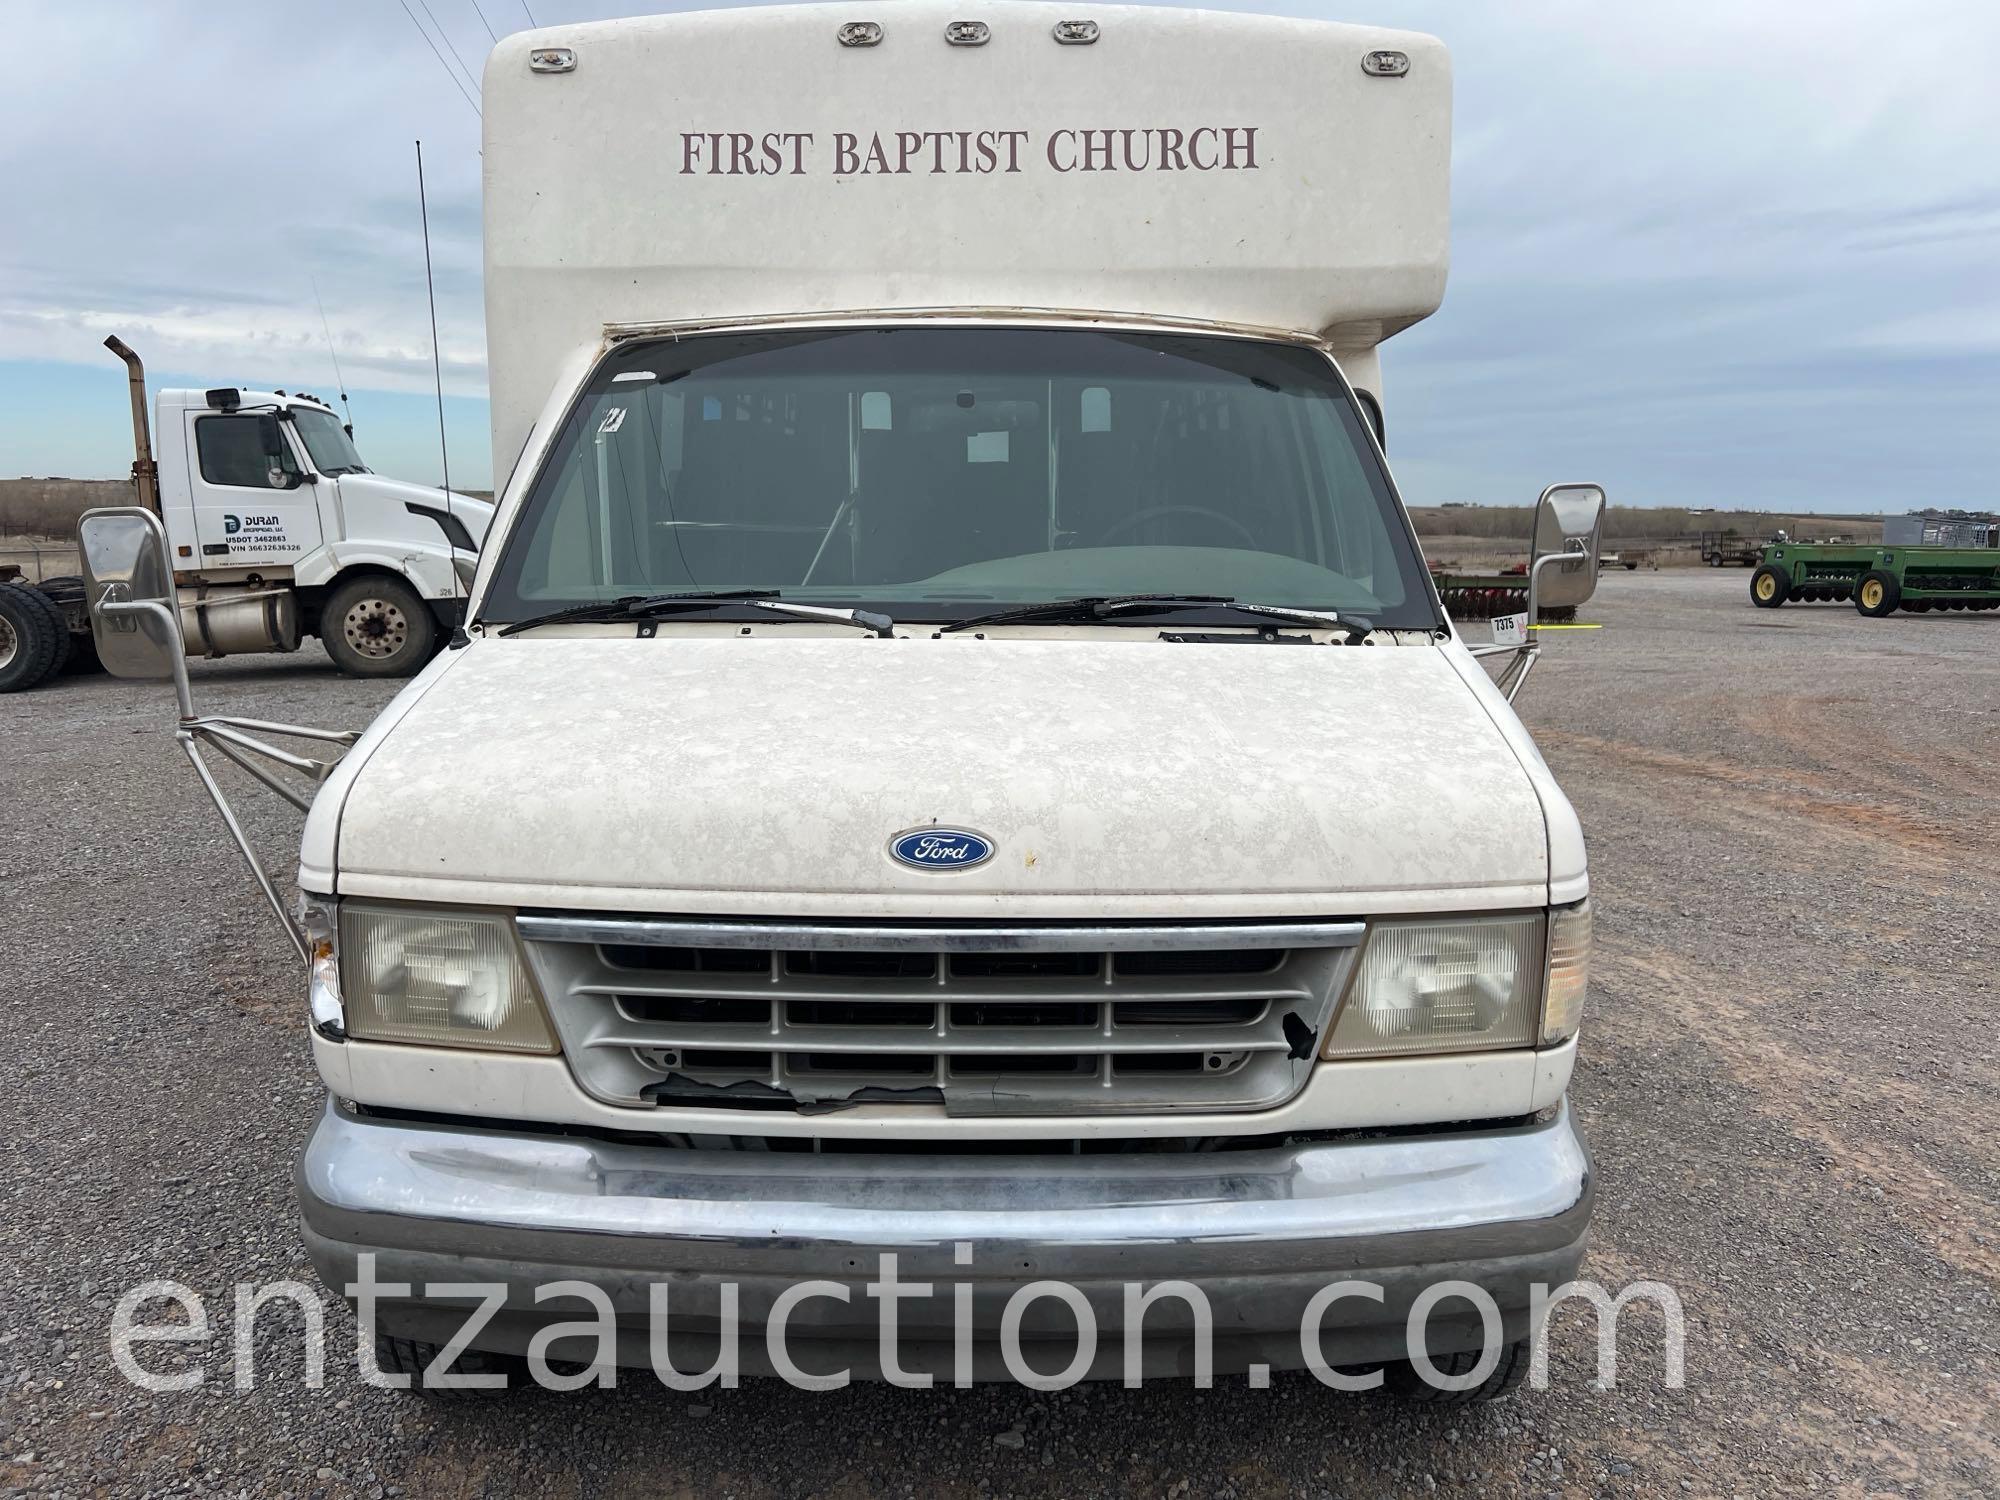 1993 FORD PEOPLE MOVER, 25 PASSENGER,